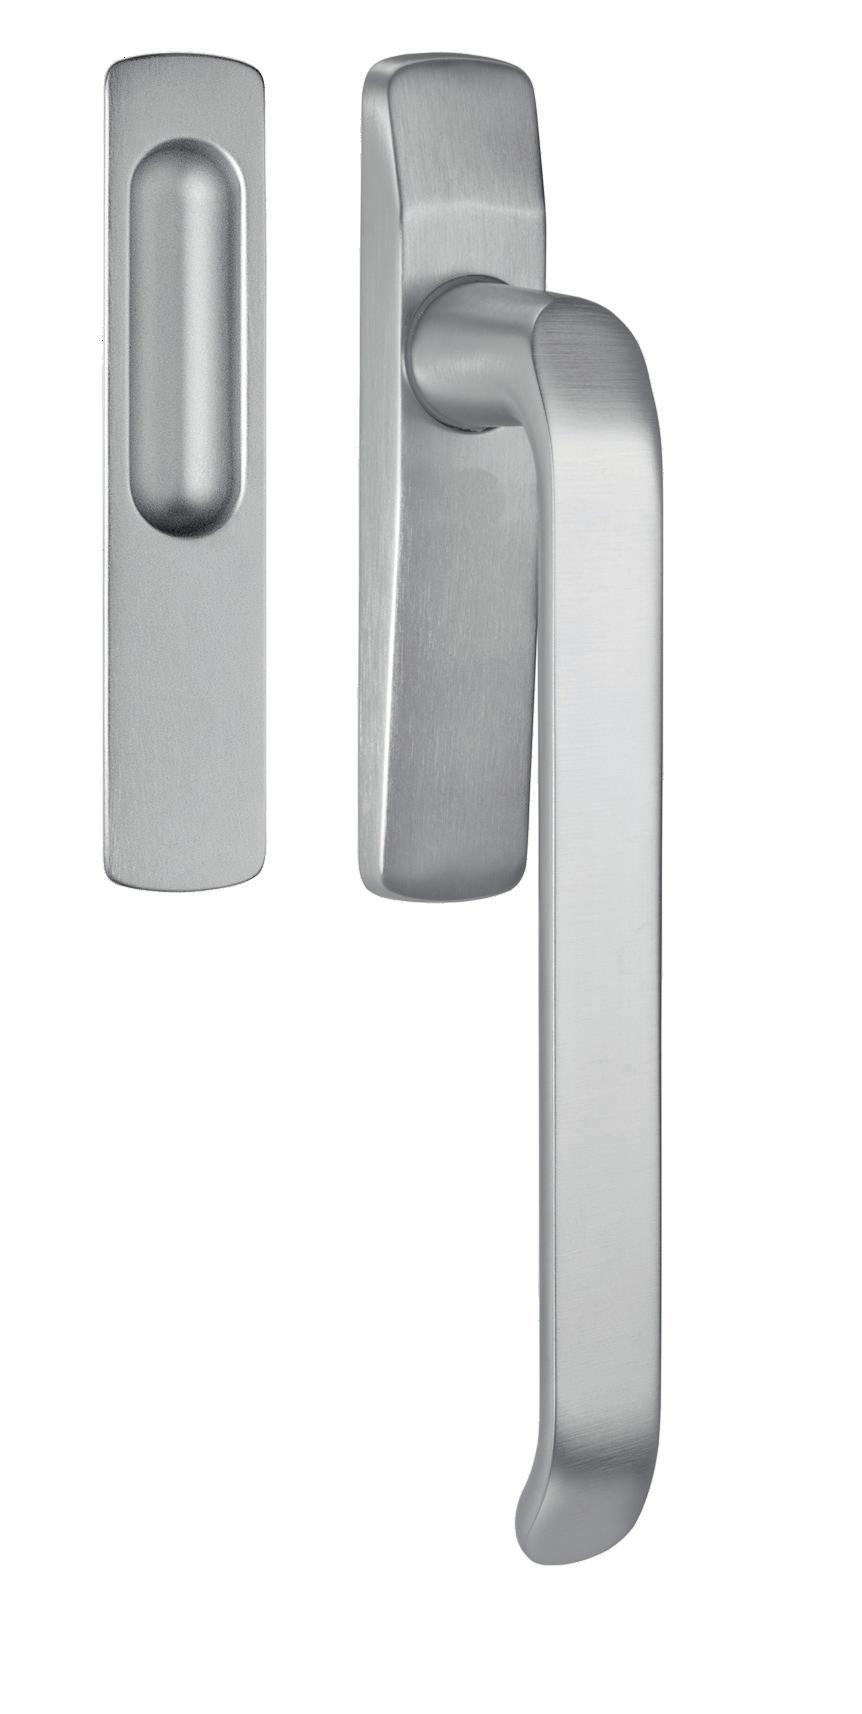 Lift & Slide Handles For AGB Lift & Slide Gearing Product Details The Lift & Slide Handle is a contemporary design and is available in a range of finishes.